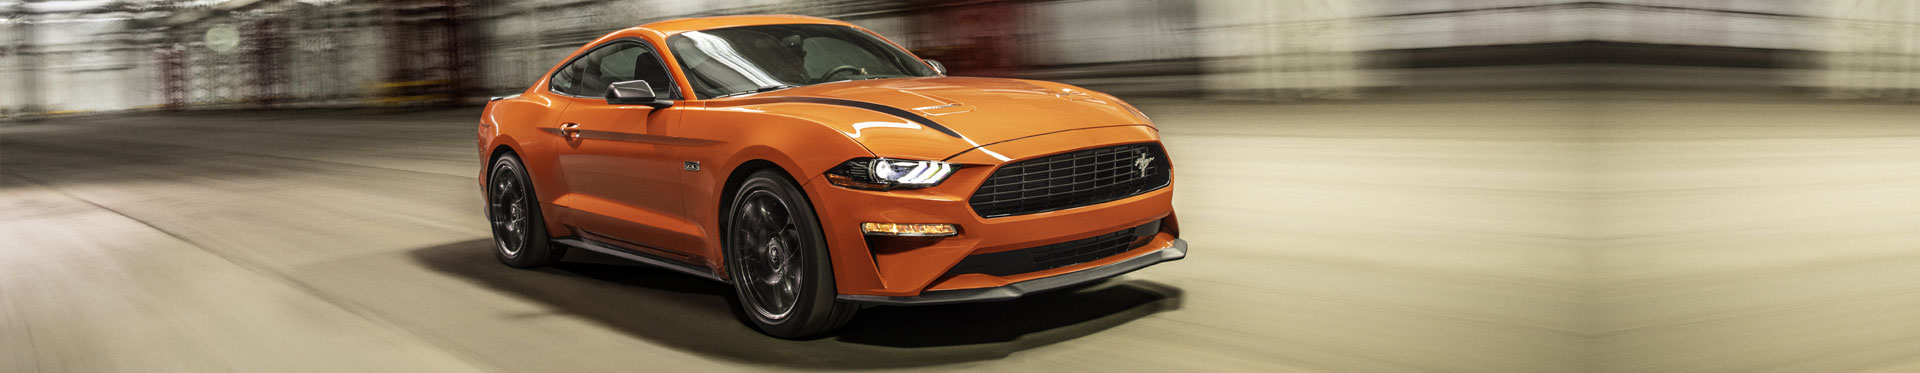 nouvelle Ford Mustang